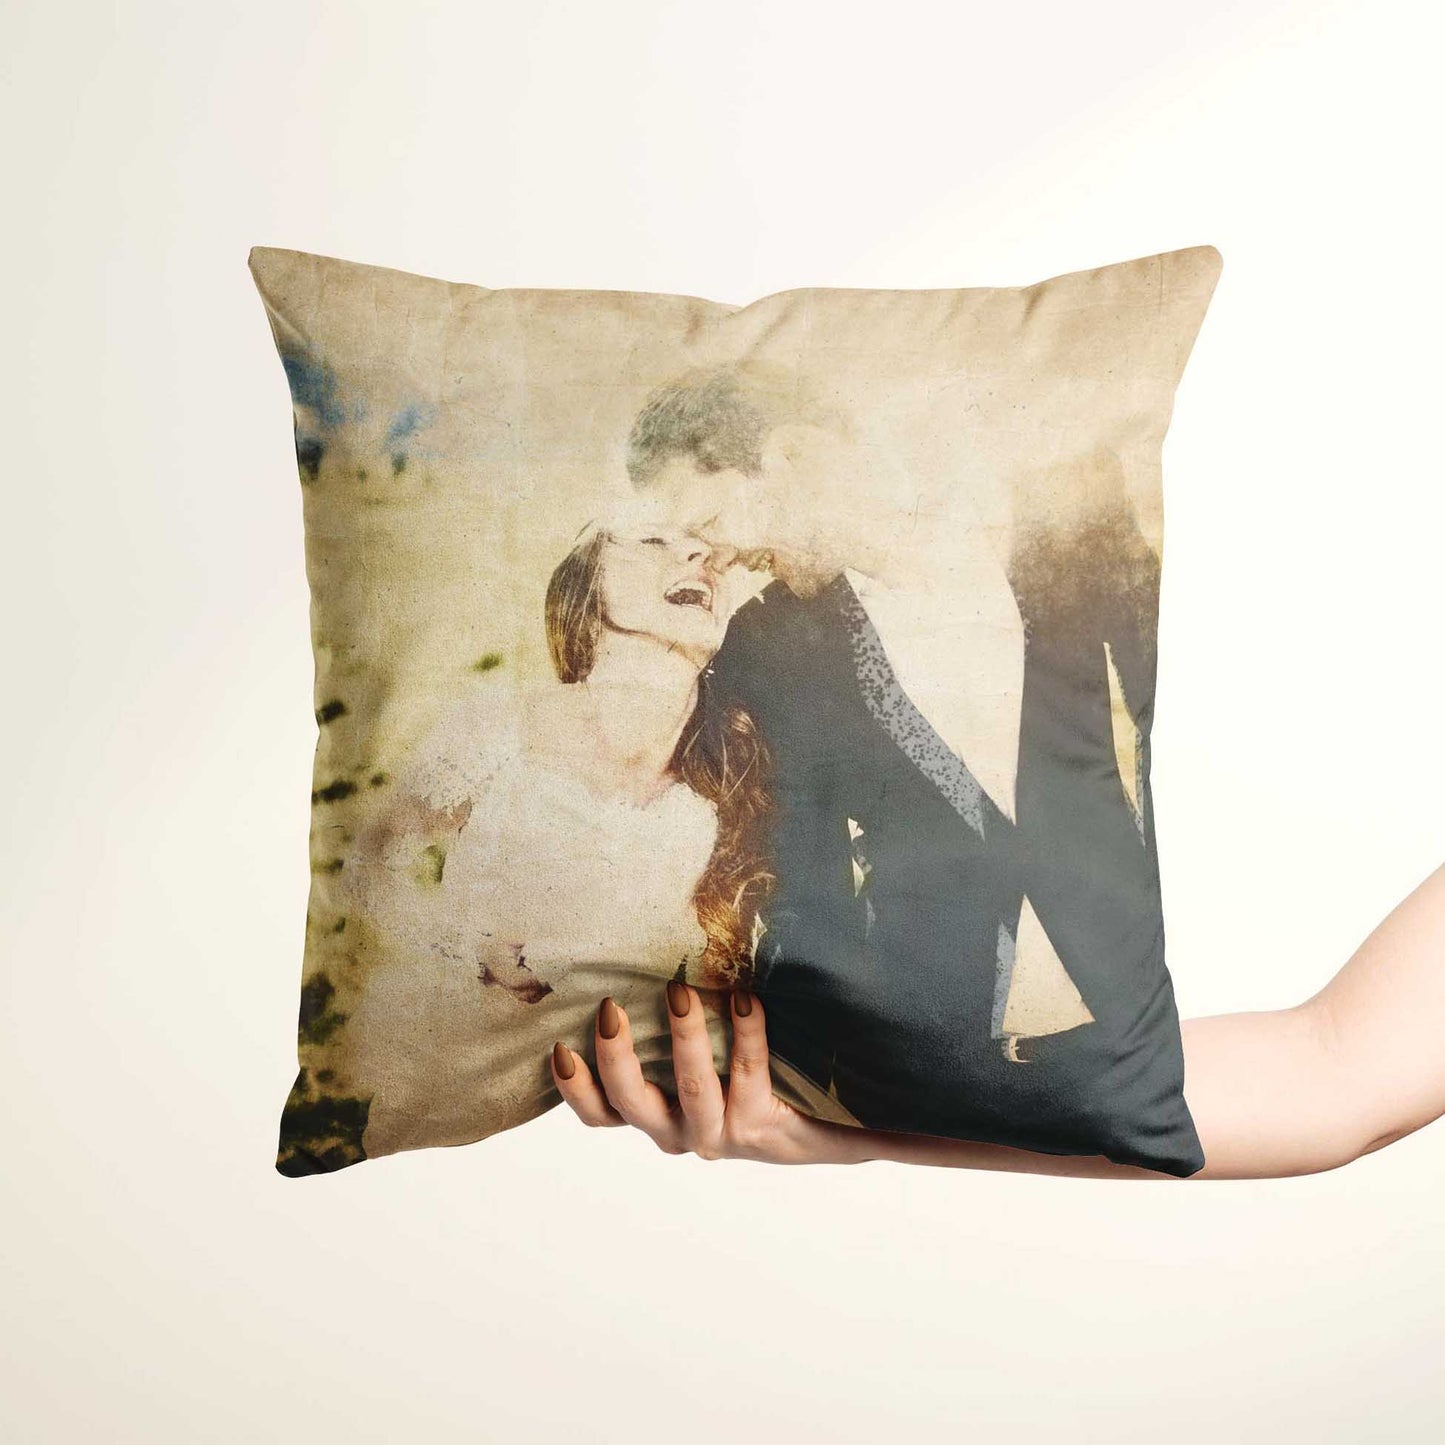 Create a unique and elegant atmosphere in your home with the Personalised Vintage Gouache Cushion. This custom-made cushion features a painting from your photo, skillfully executed with watercolour technique for an authentic and real art